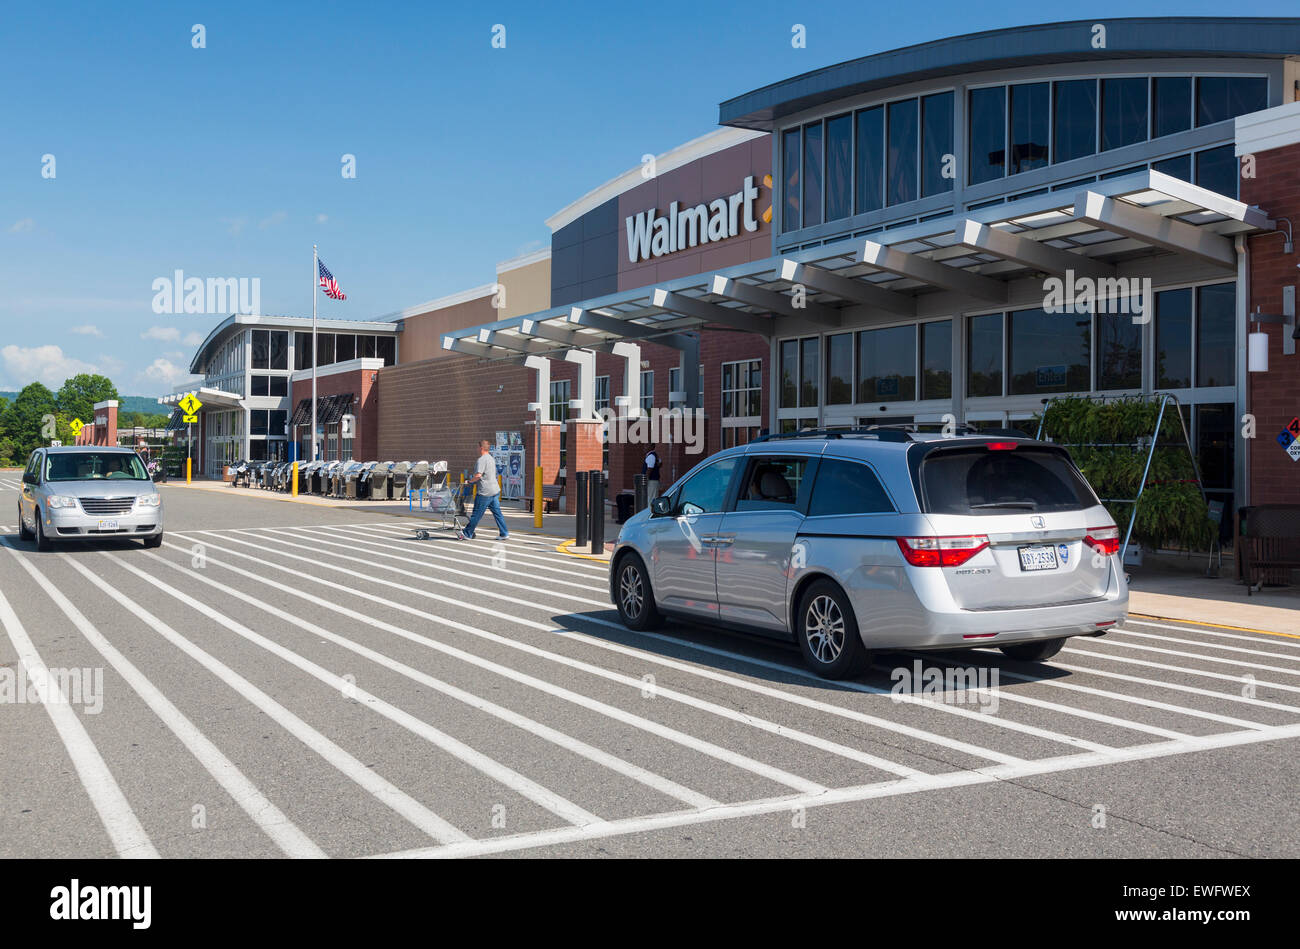 Entrance to large Walmart food supermarket or superstore in Haymarket, Virginia, USA Stock Photo